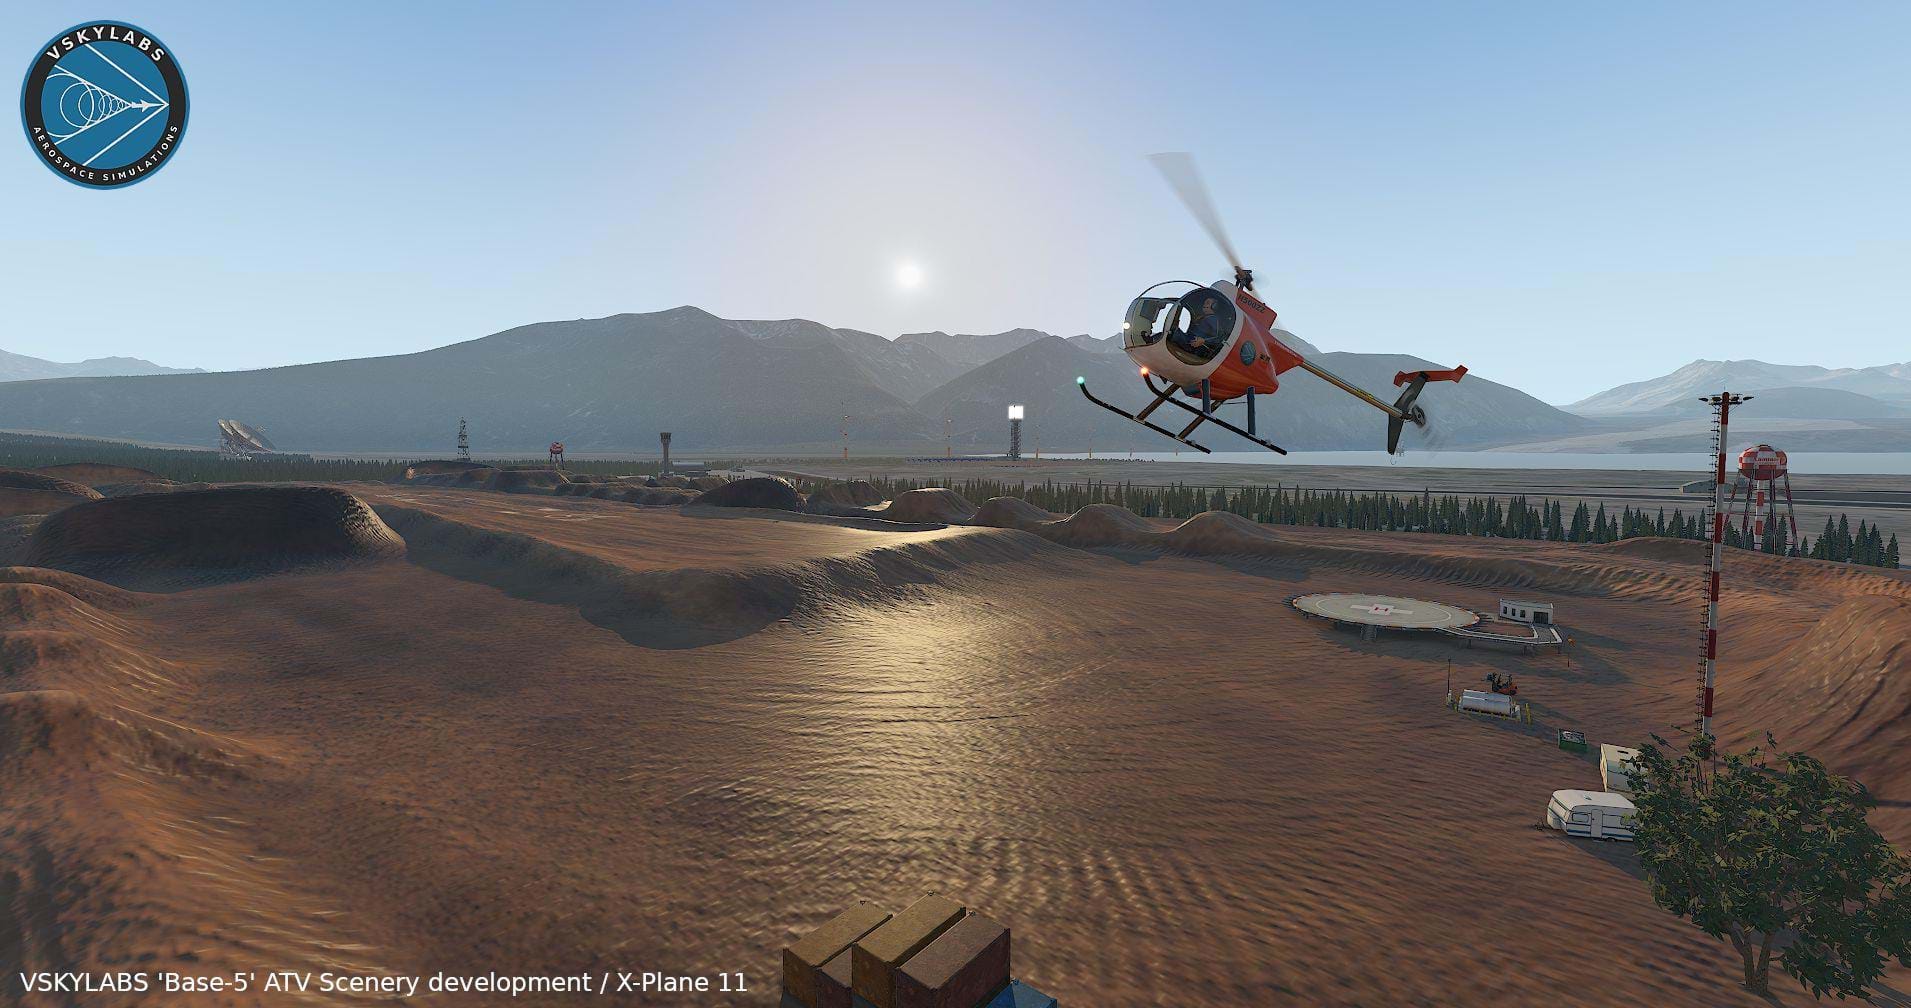 VSKYLABS is developing a helicopter training scenery for X-Plane